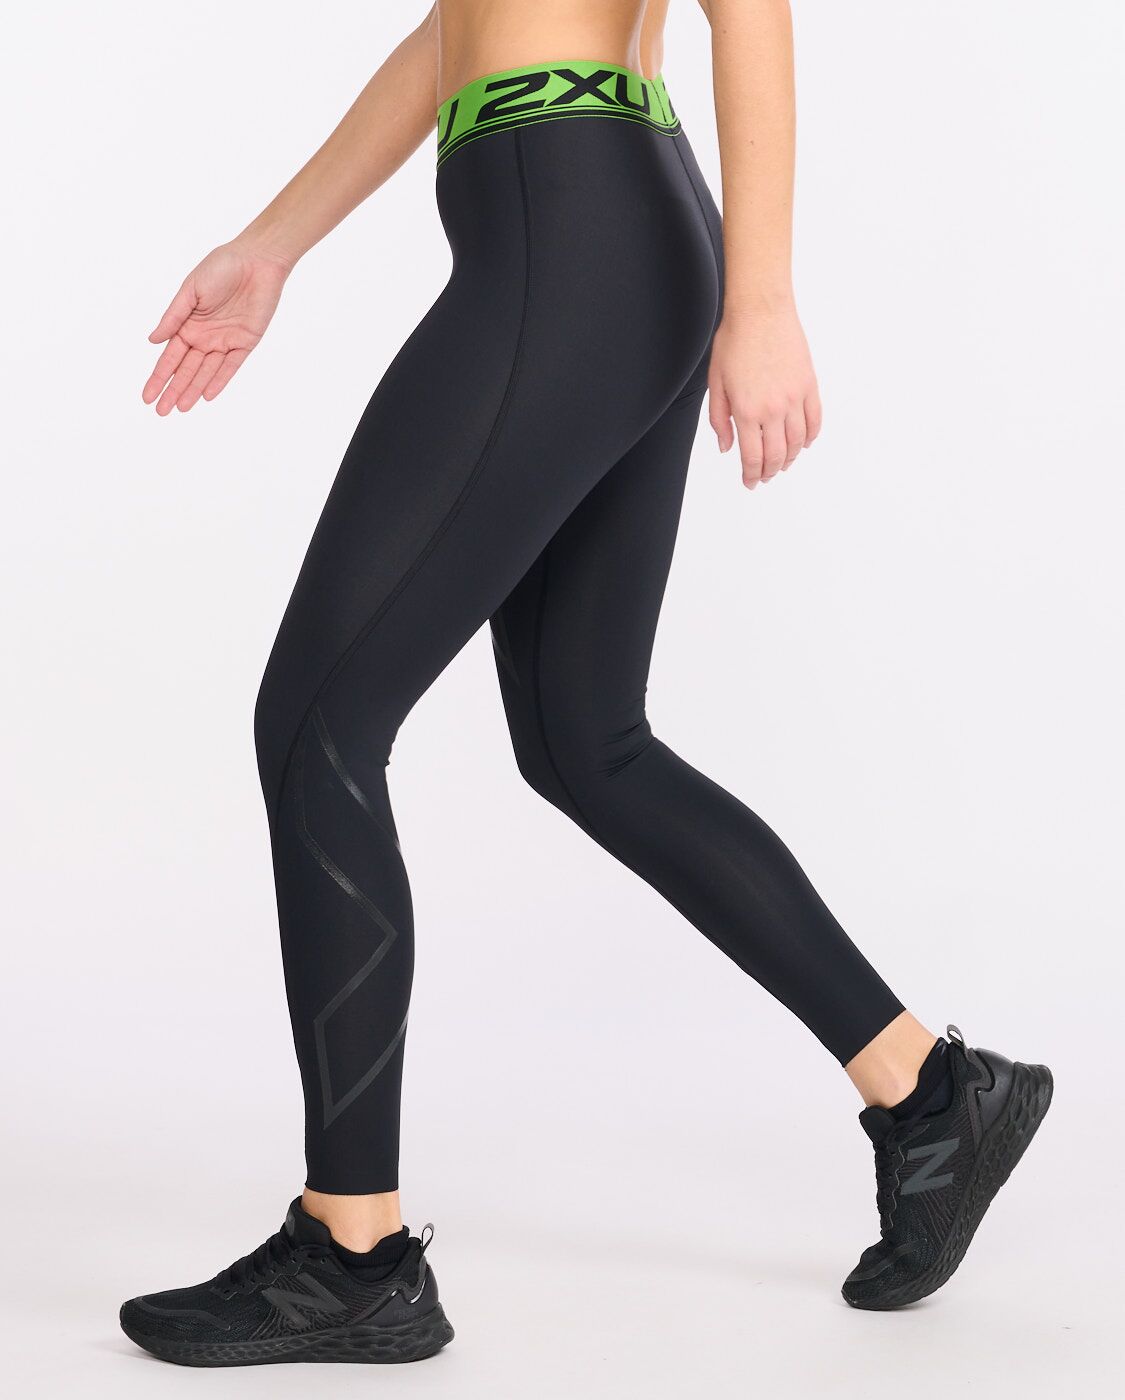 Power Recovery compression Tights – 2XU